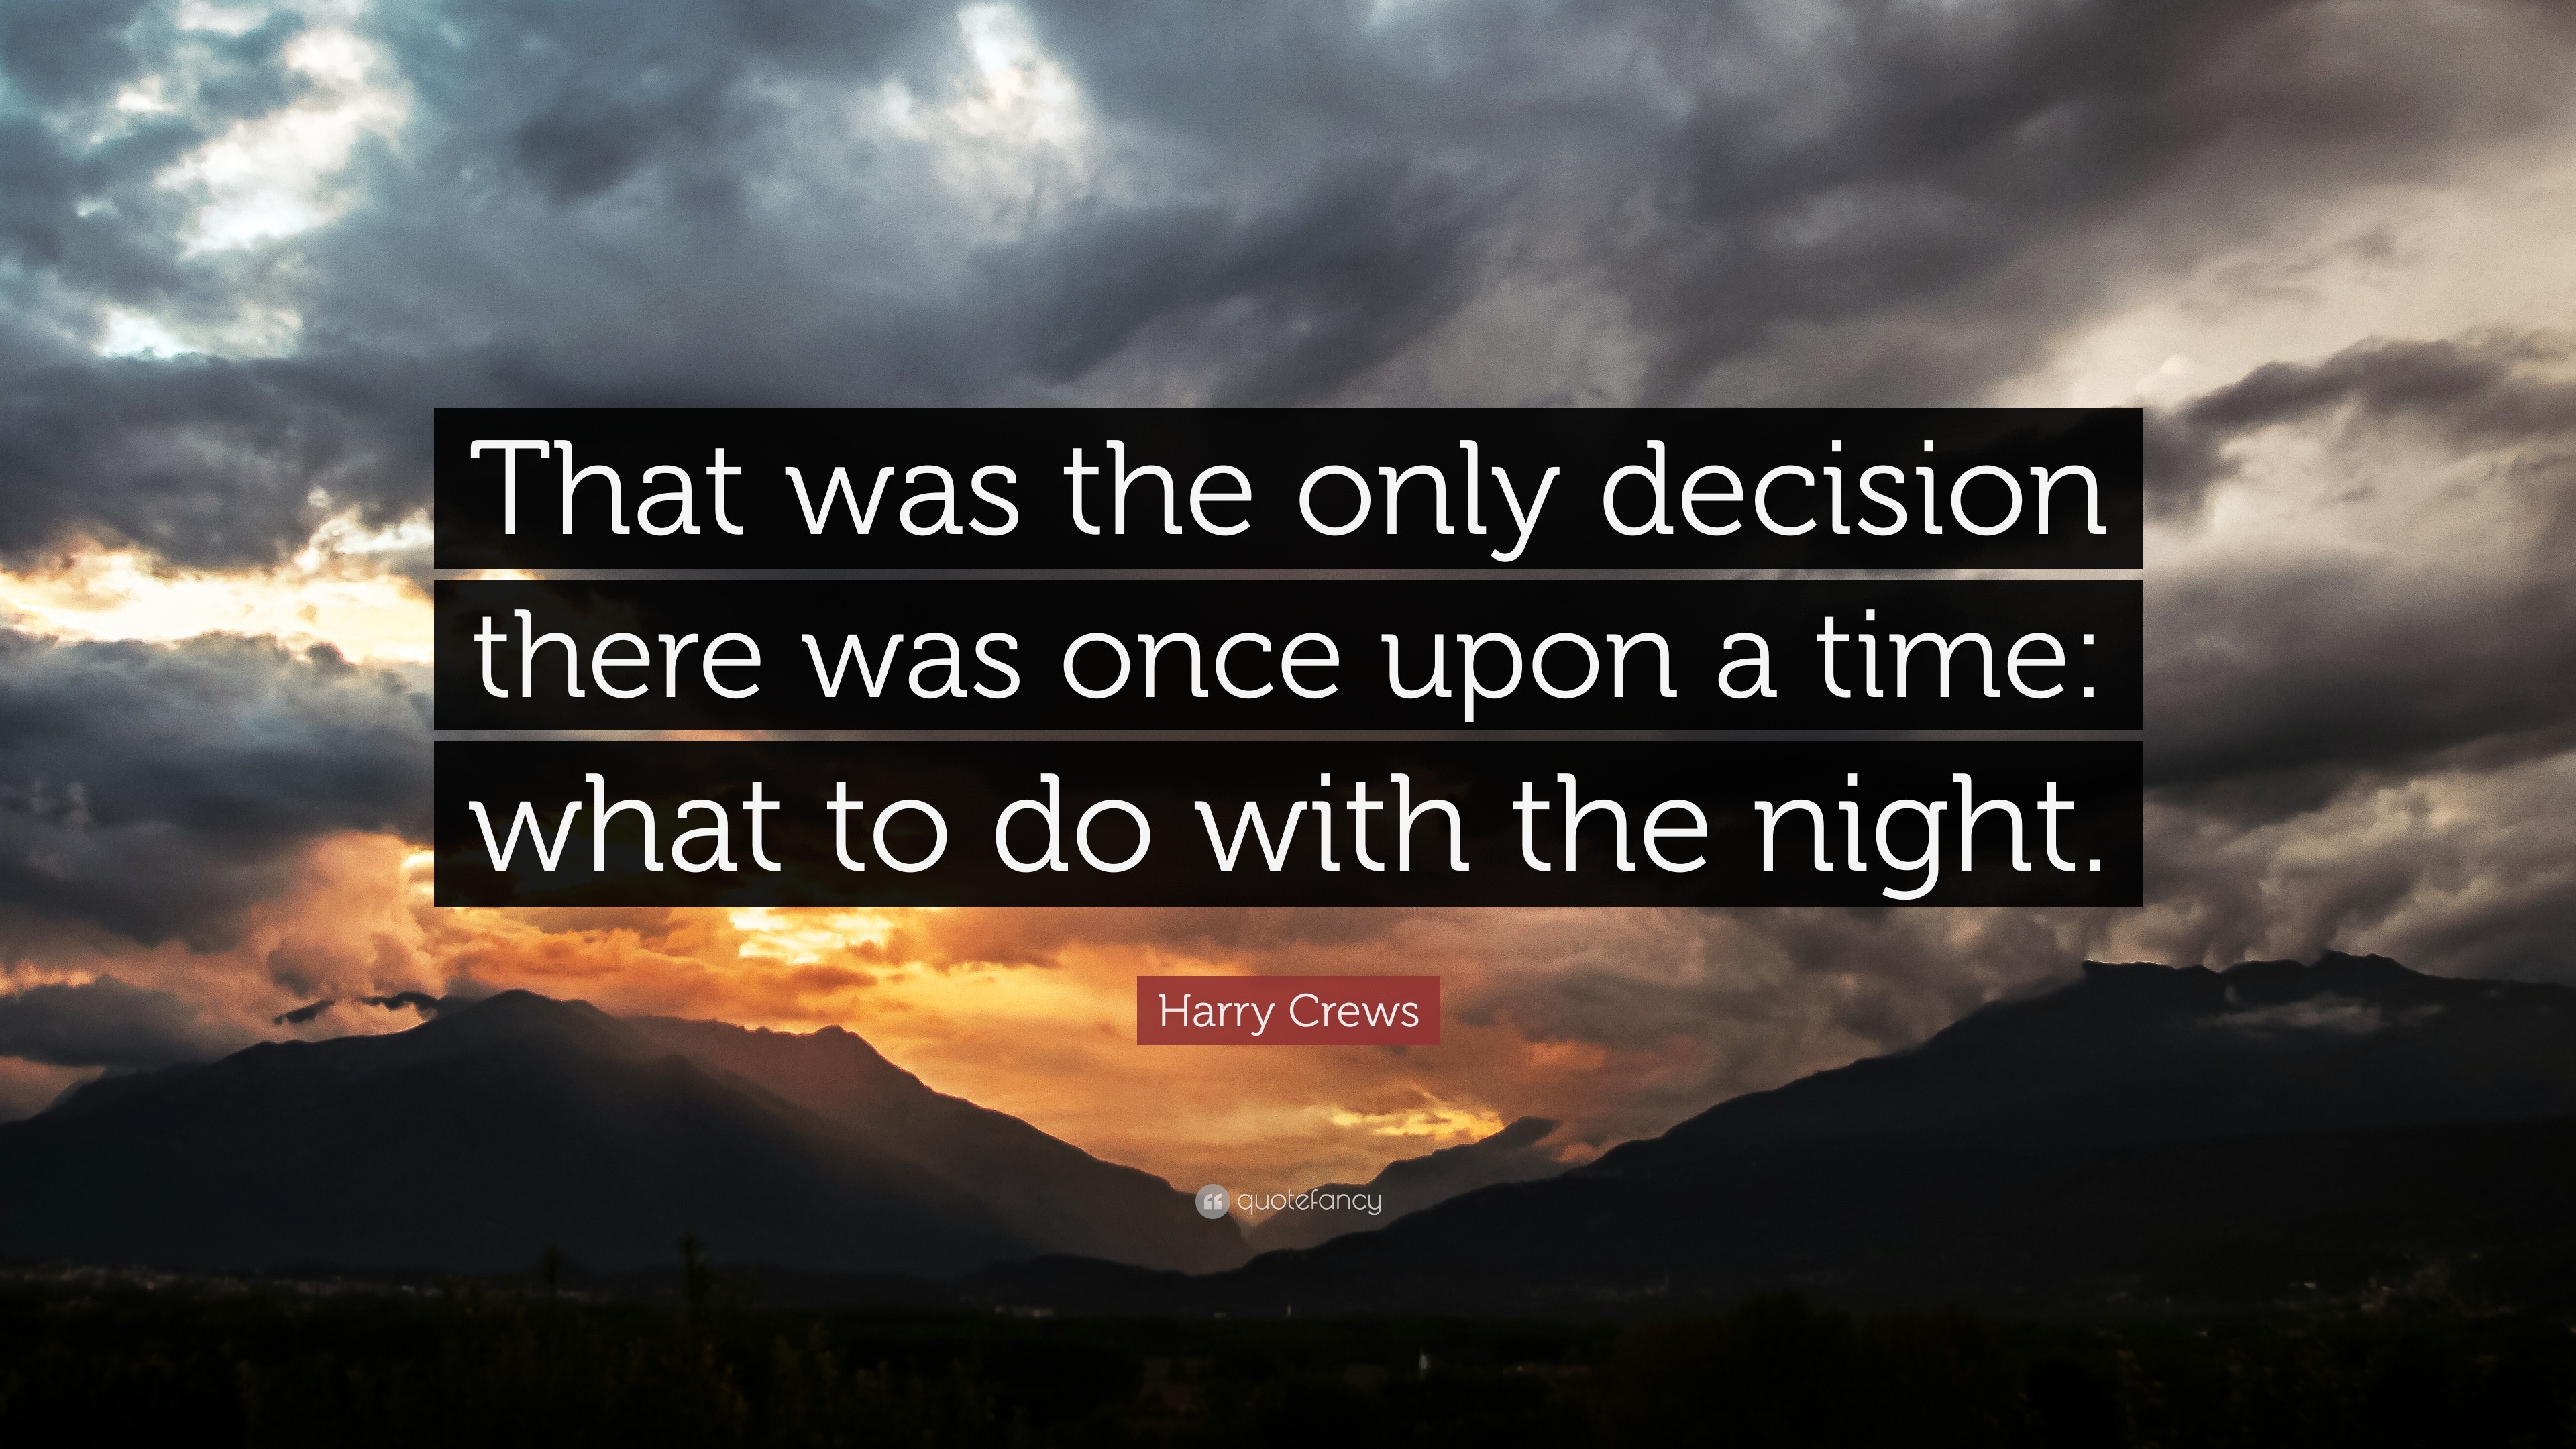 Harry Crews Quote “That was the only decision there was once upon a time